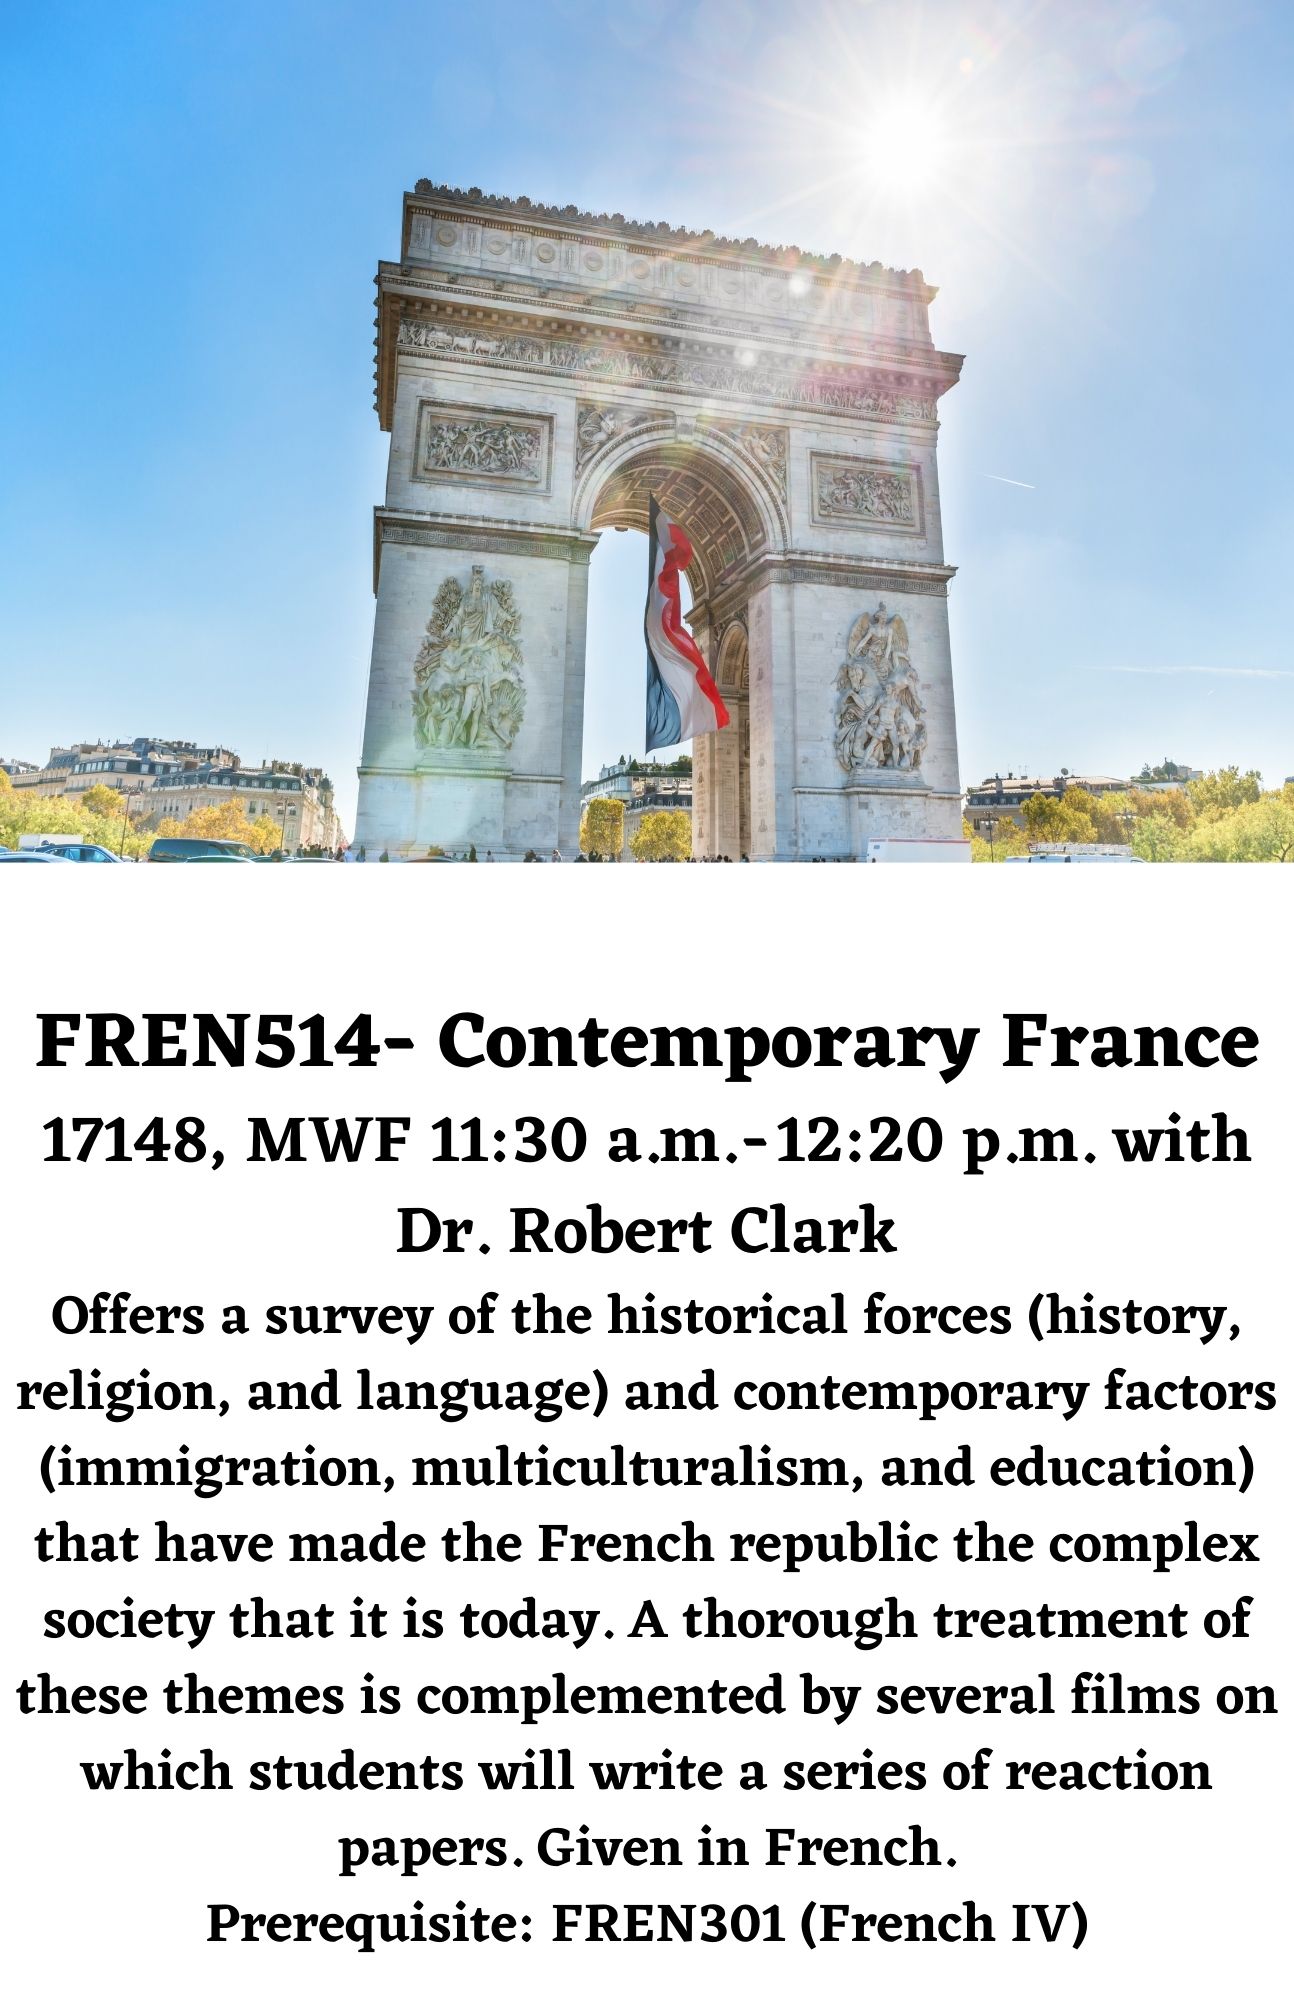 FREN514- Contemporary France 17148, MWF 11:30 a.m. - 12:20 p.m. with Dr. Robert Clark Offers a survey of the historical forces (history, religion, and language) and contemporary factors (immigration, multiculturalism, and education) that have made the French republic the complex society that it is today. A thorough treatment of these themes is complemented by several films on which students will write a series of reaction papers. Given in French. Prerequisite: FREN301 (French IV)